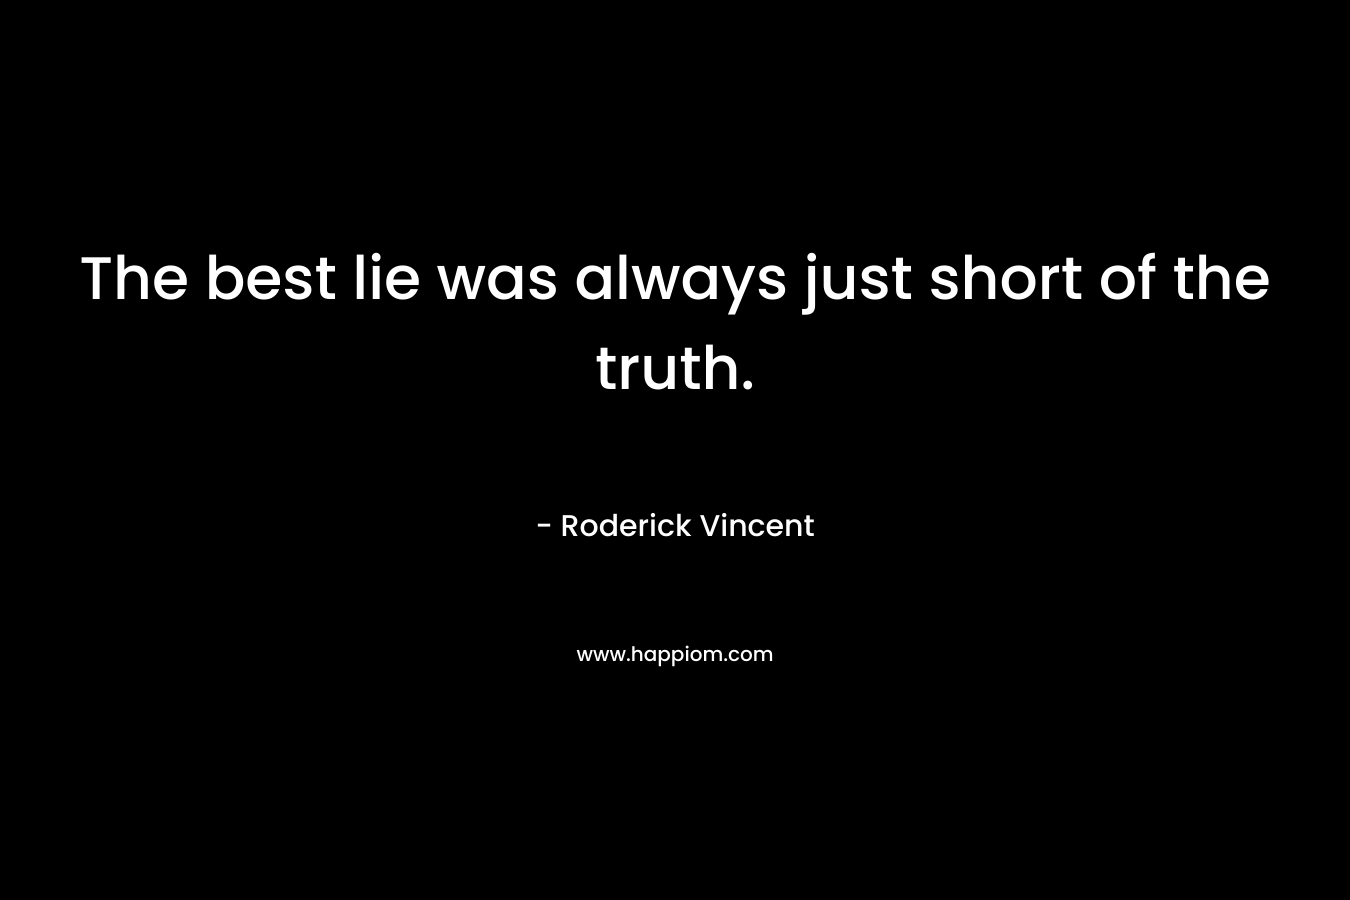 The best lie was always just short of the truth. – Roderick Vincent